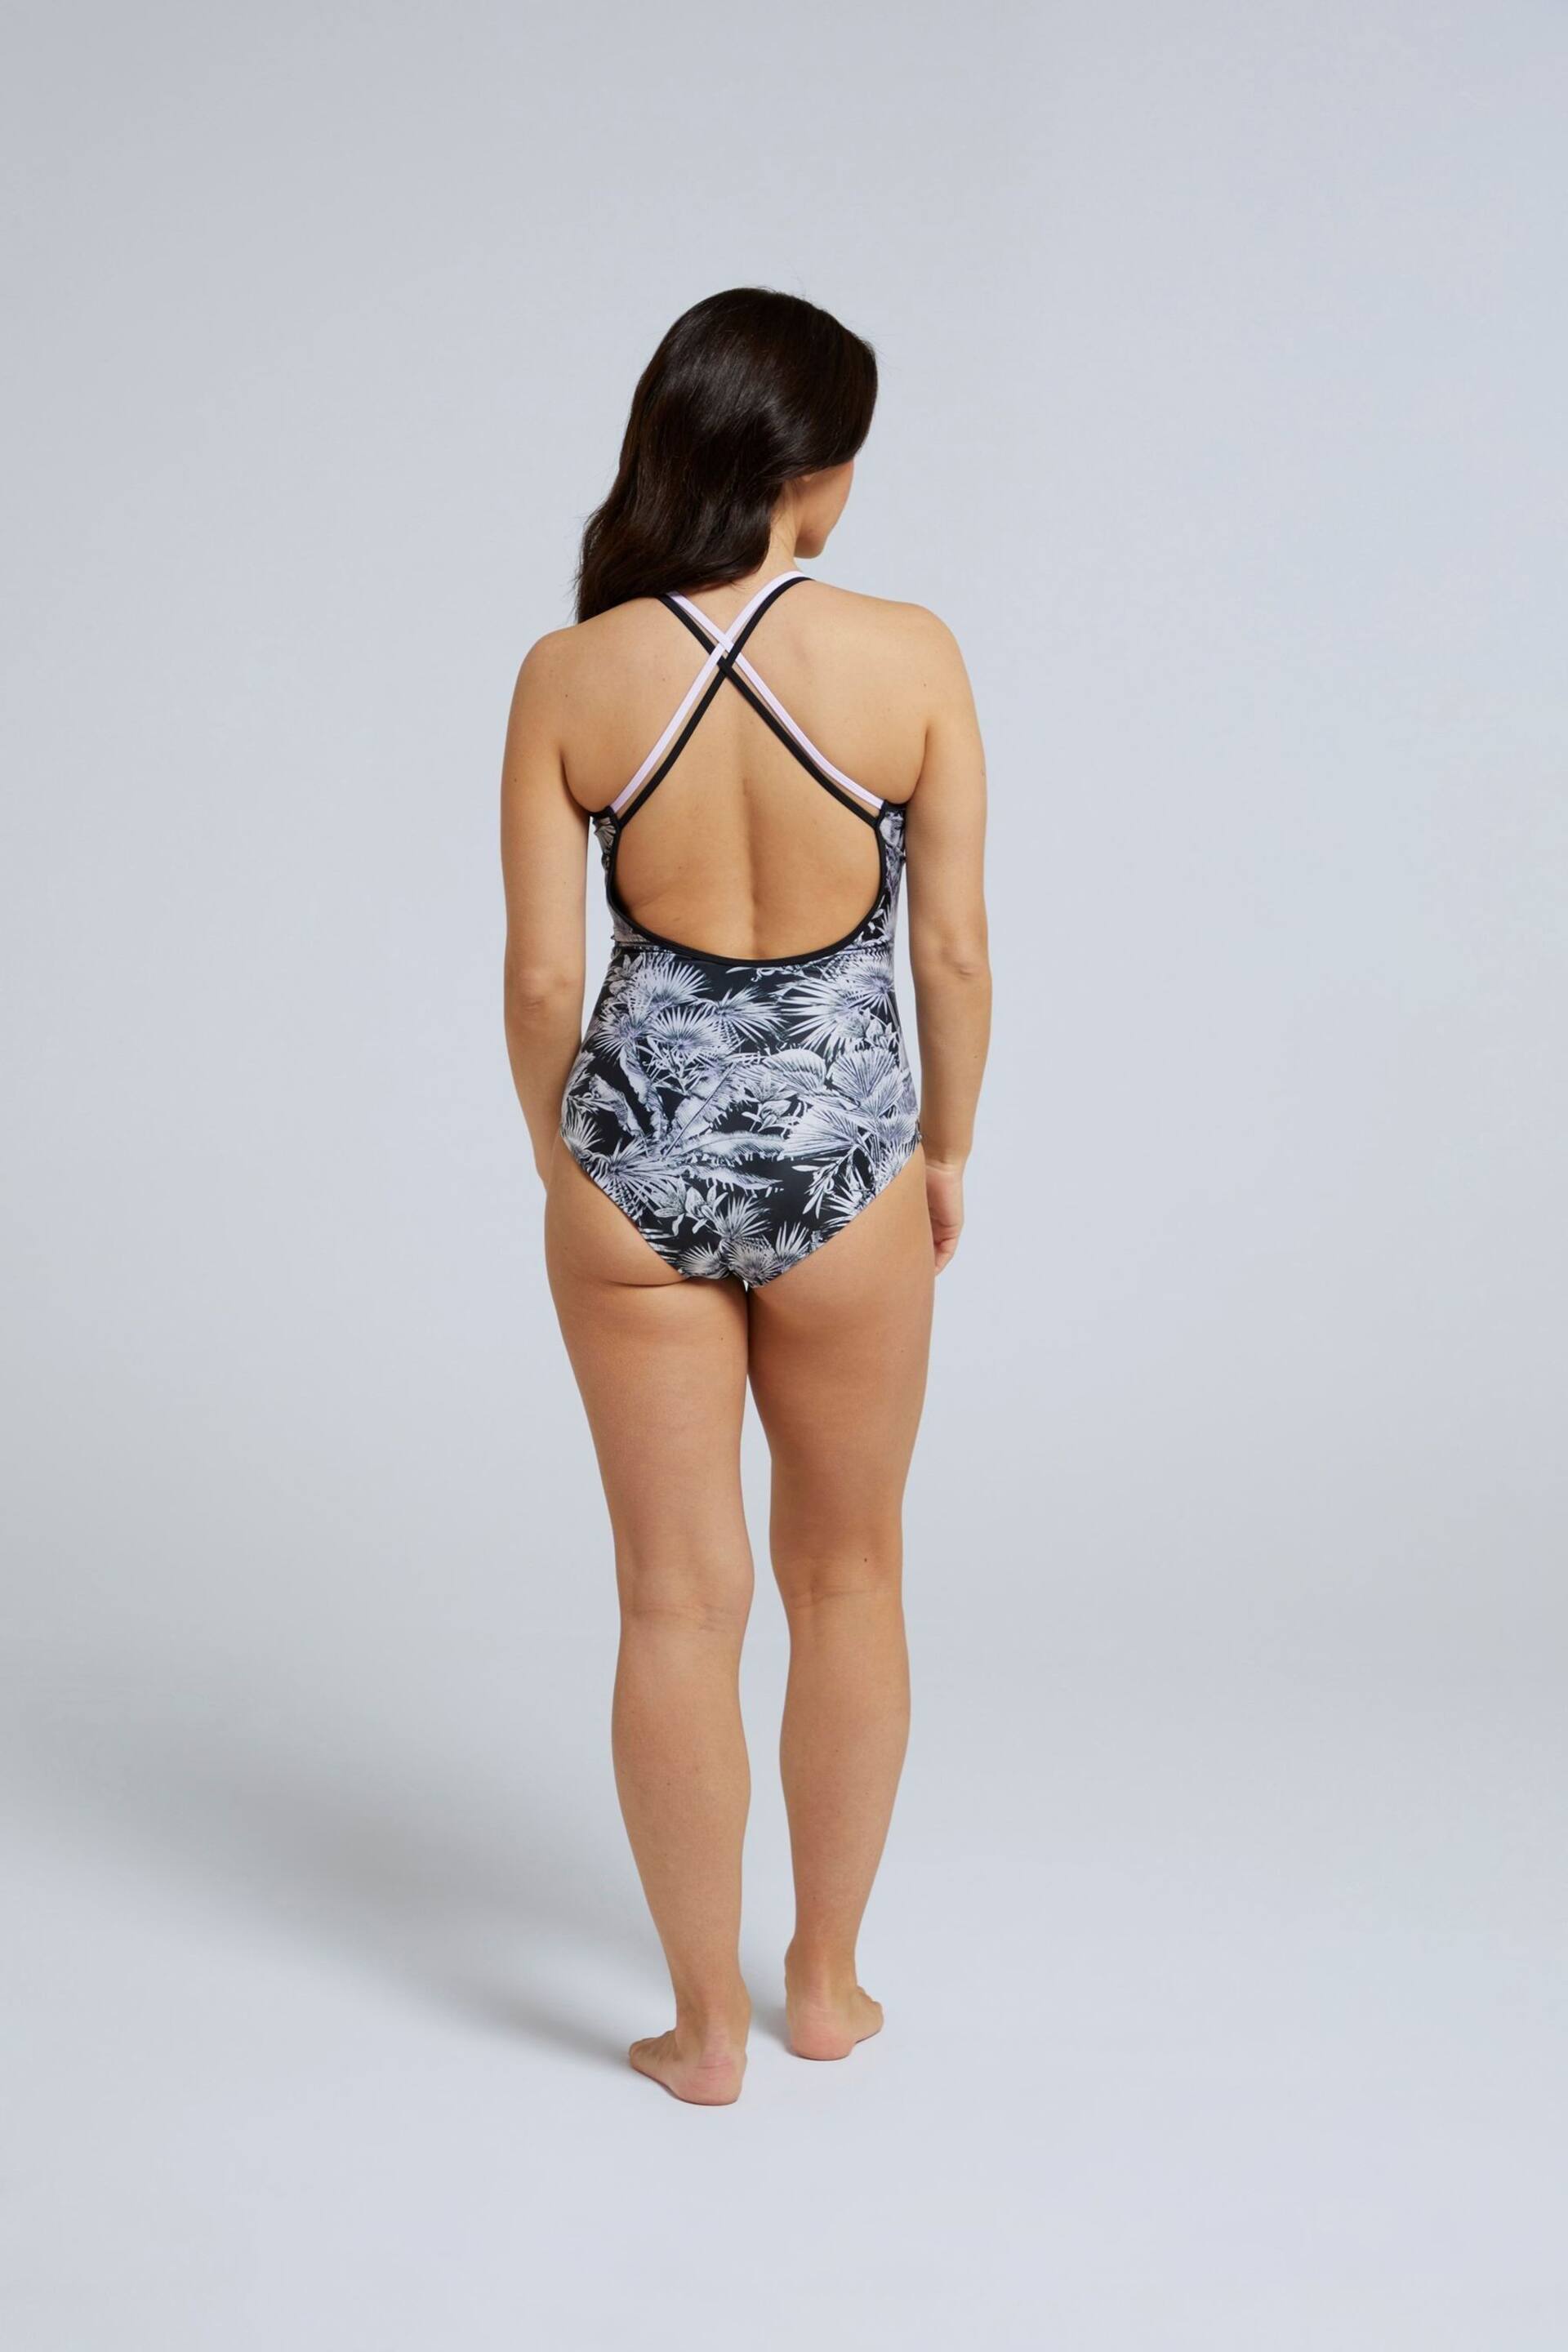 Animal Womens Zora Strappy Swimsuit - Image 3 of 11